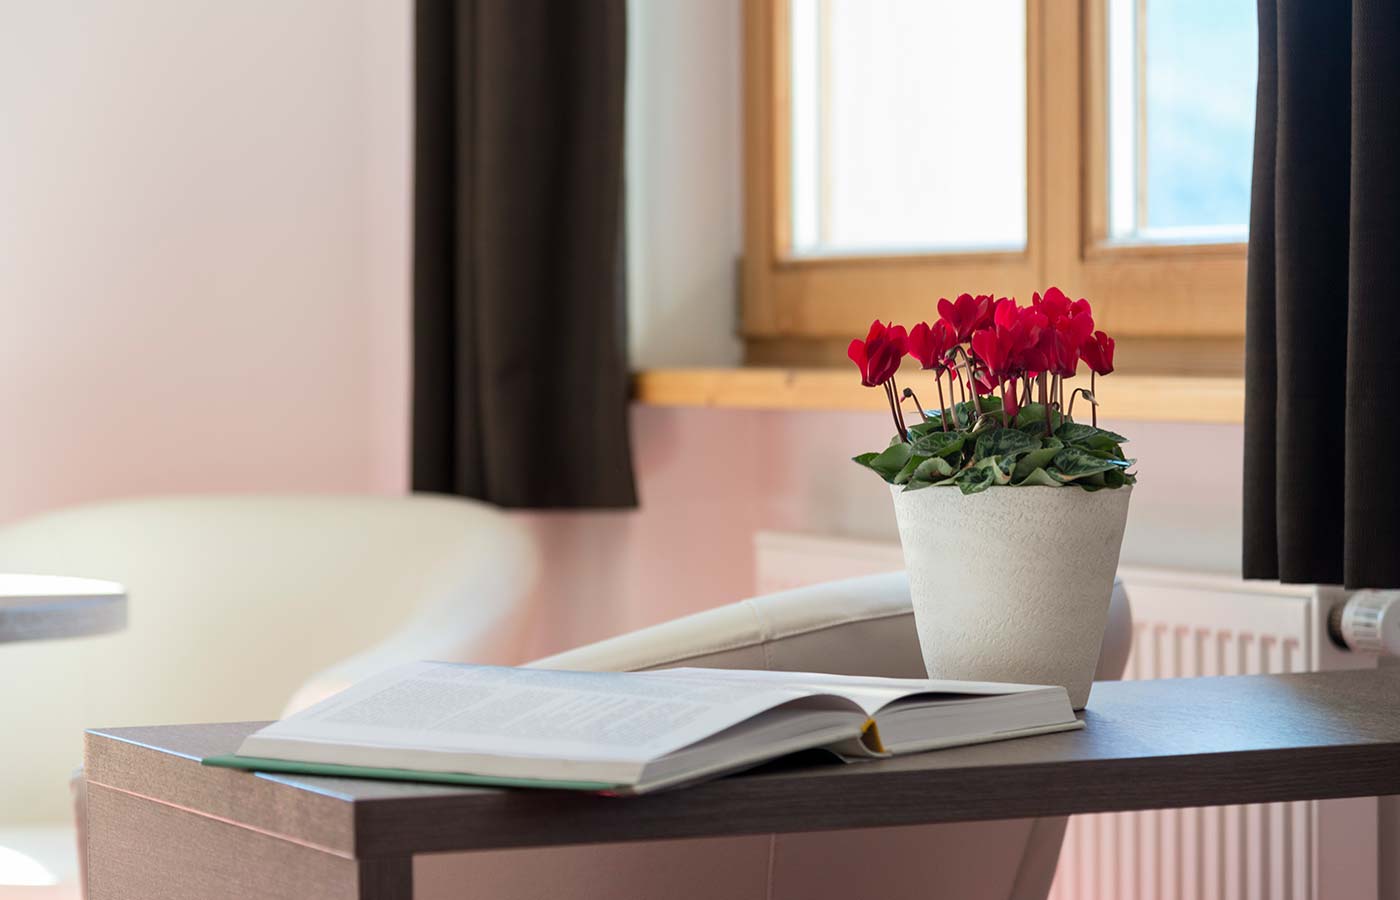 Vase of flowers and book open on a table in one of the rooms at the Waldheim's